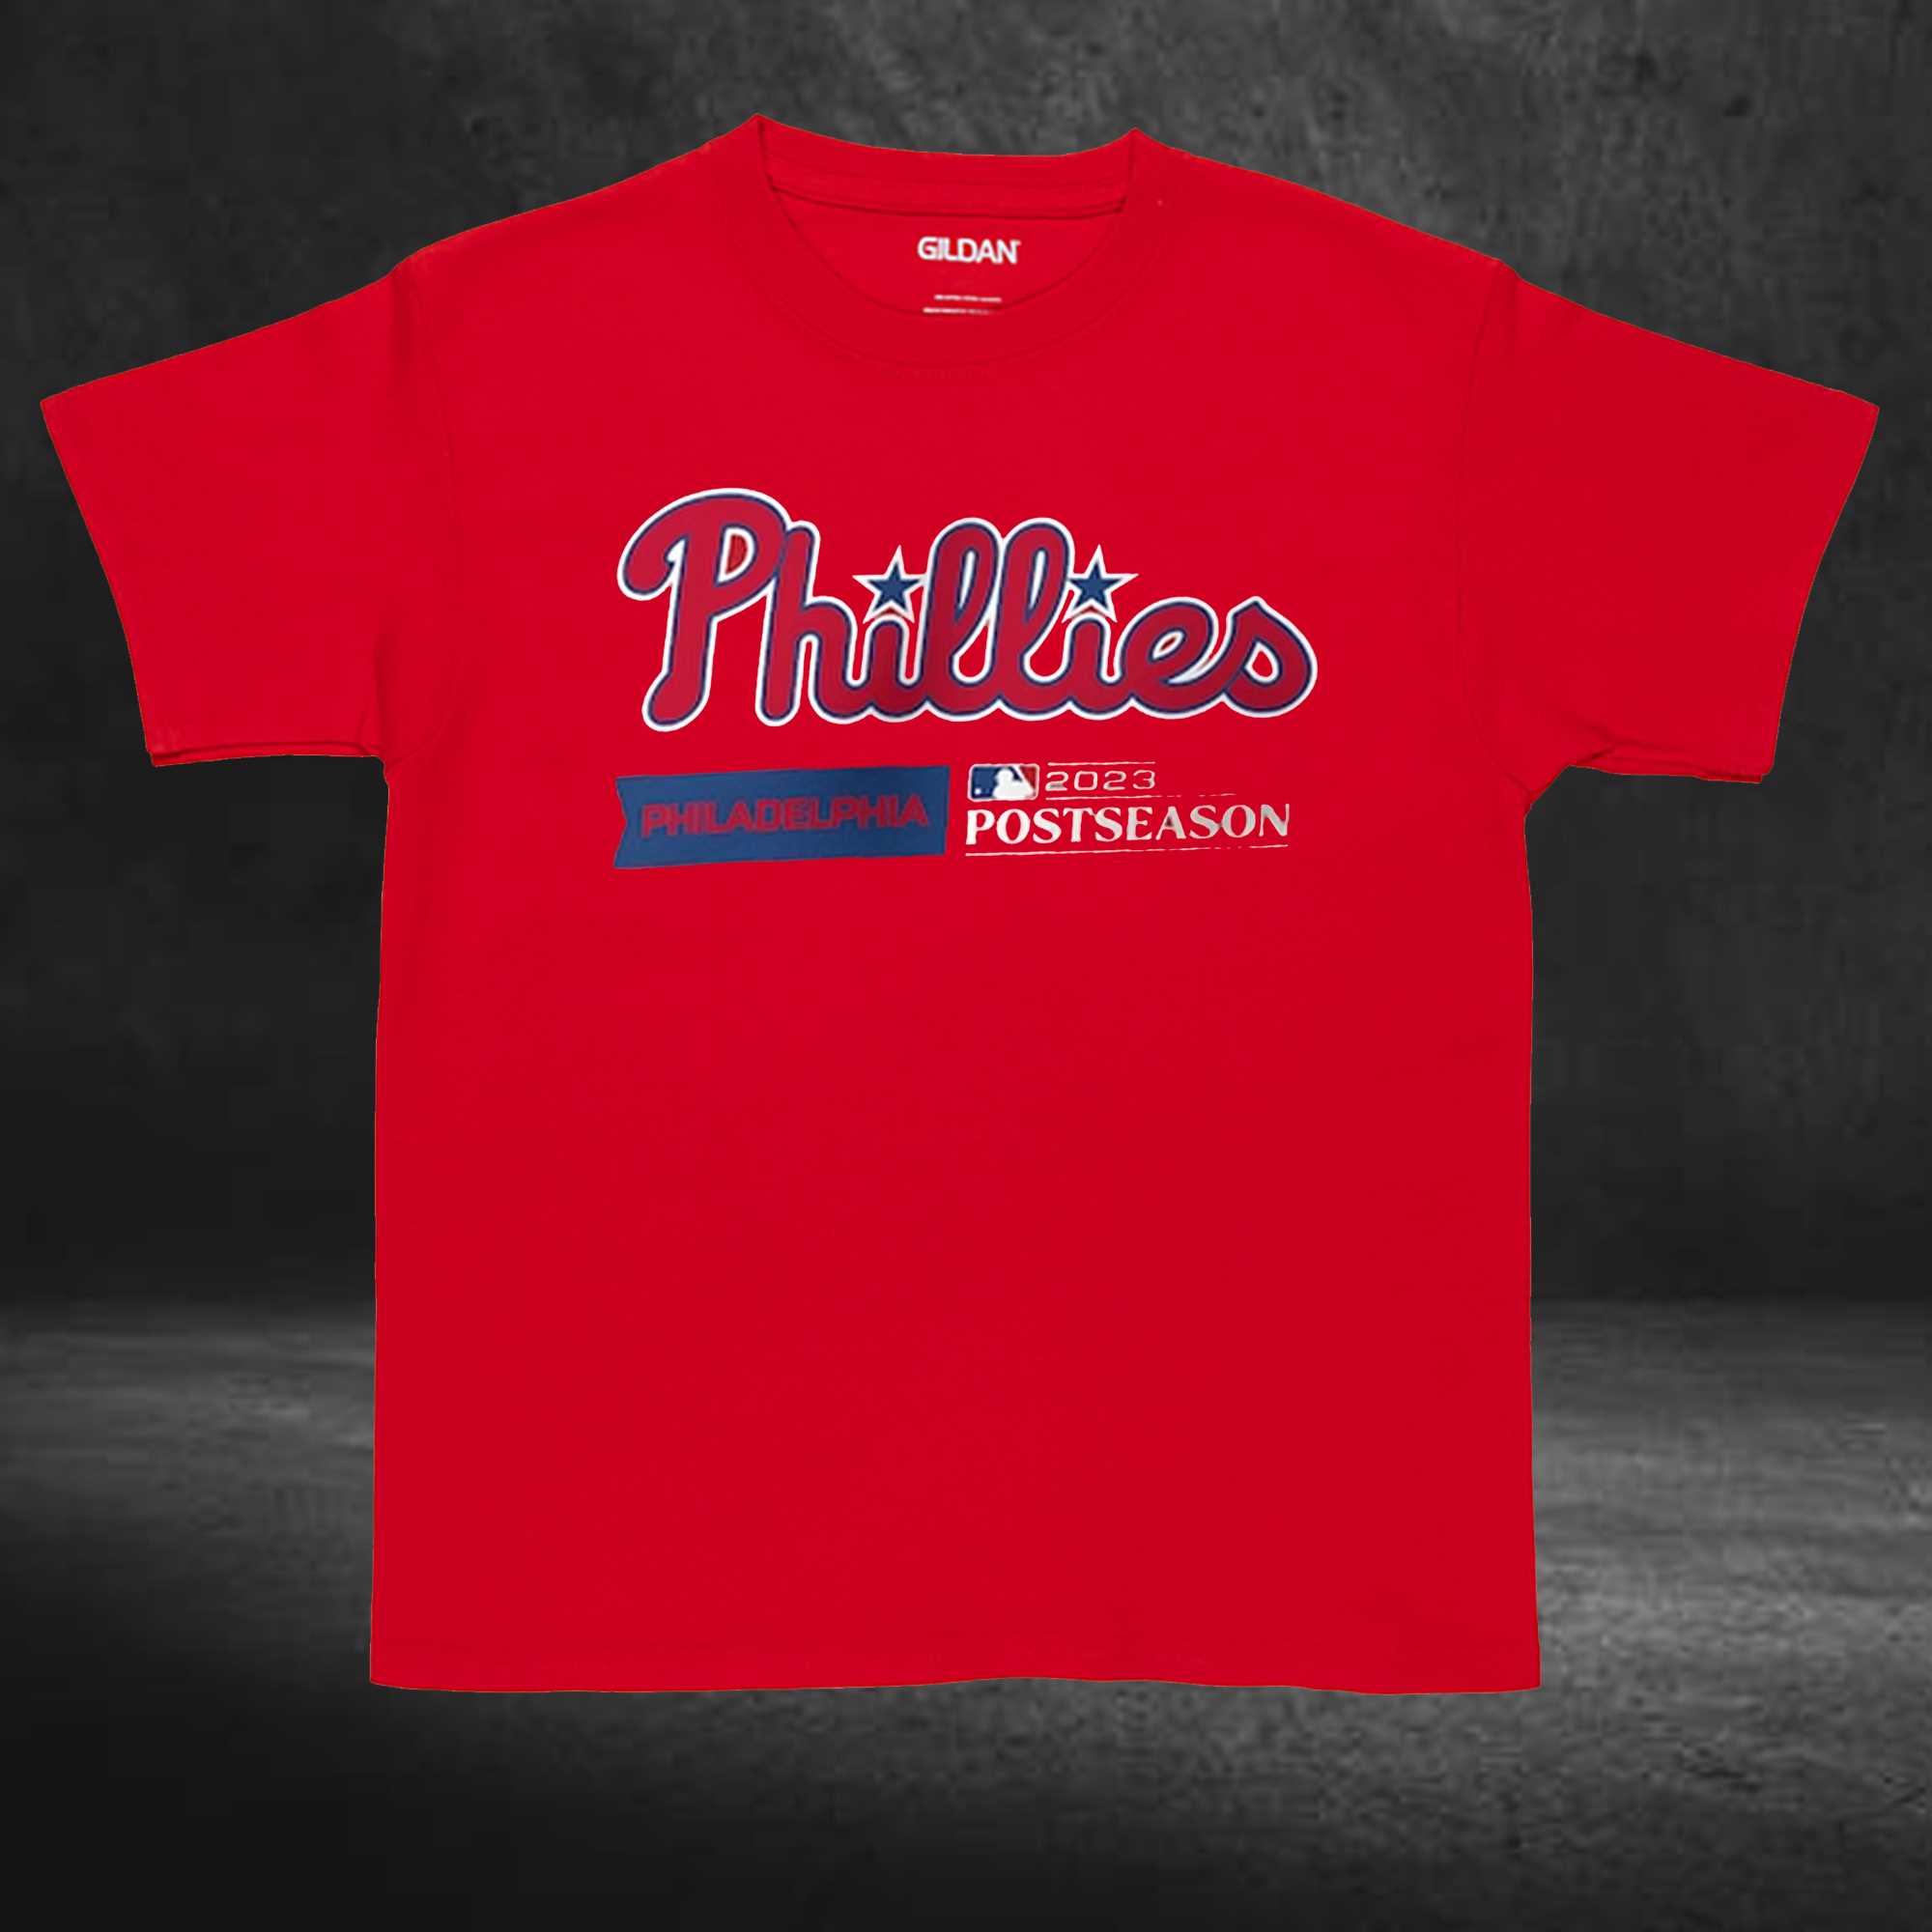 Show off your team spirit with women's Philadelphia Phillies apparel:  Represent the Philadelphia Phillies in style with a women's shirt